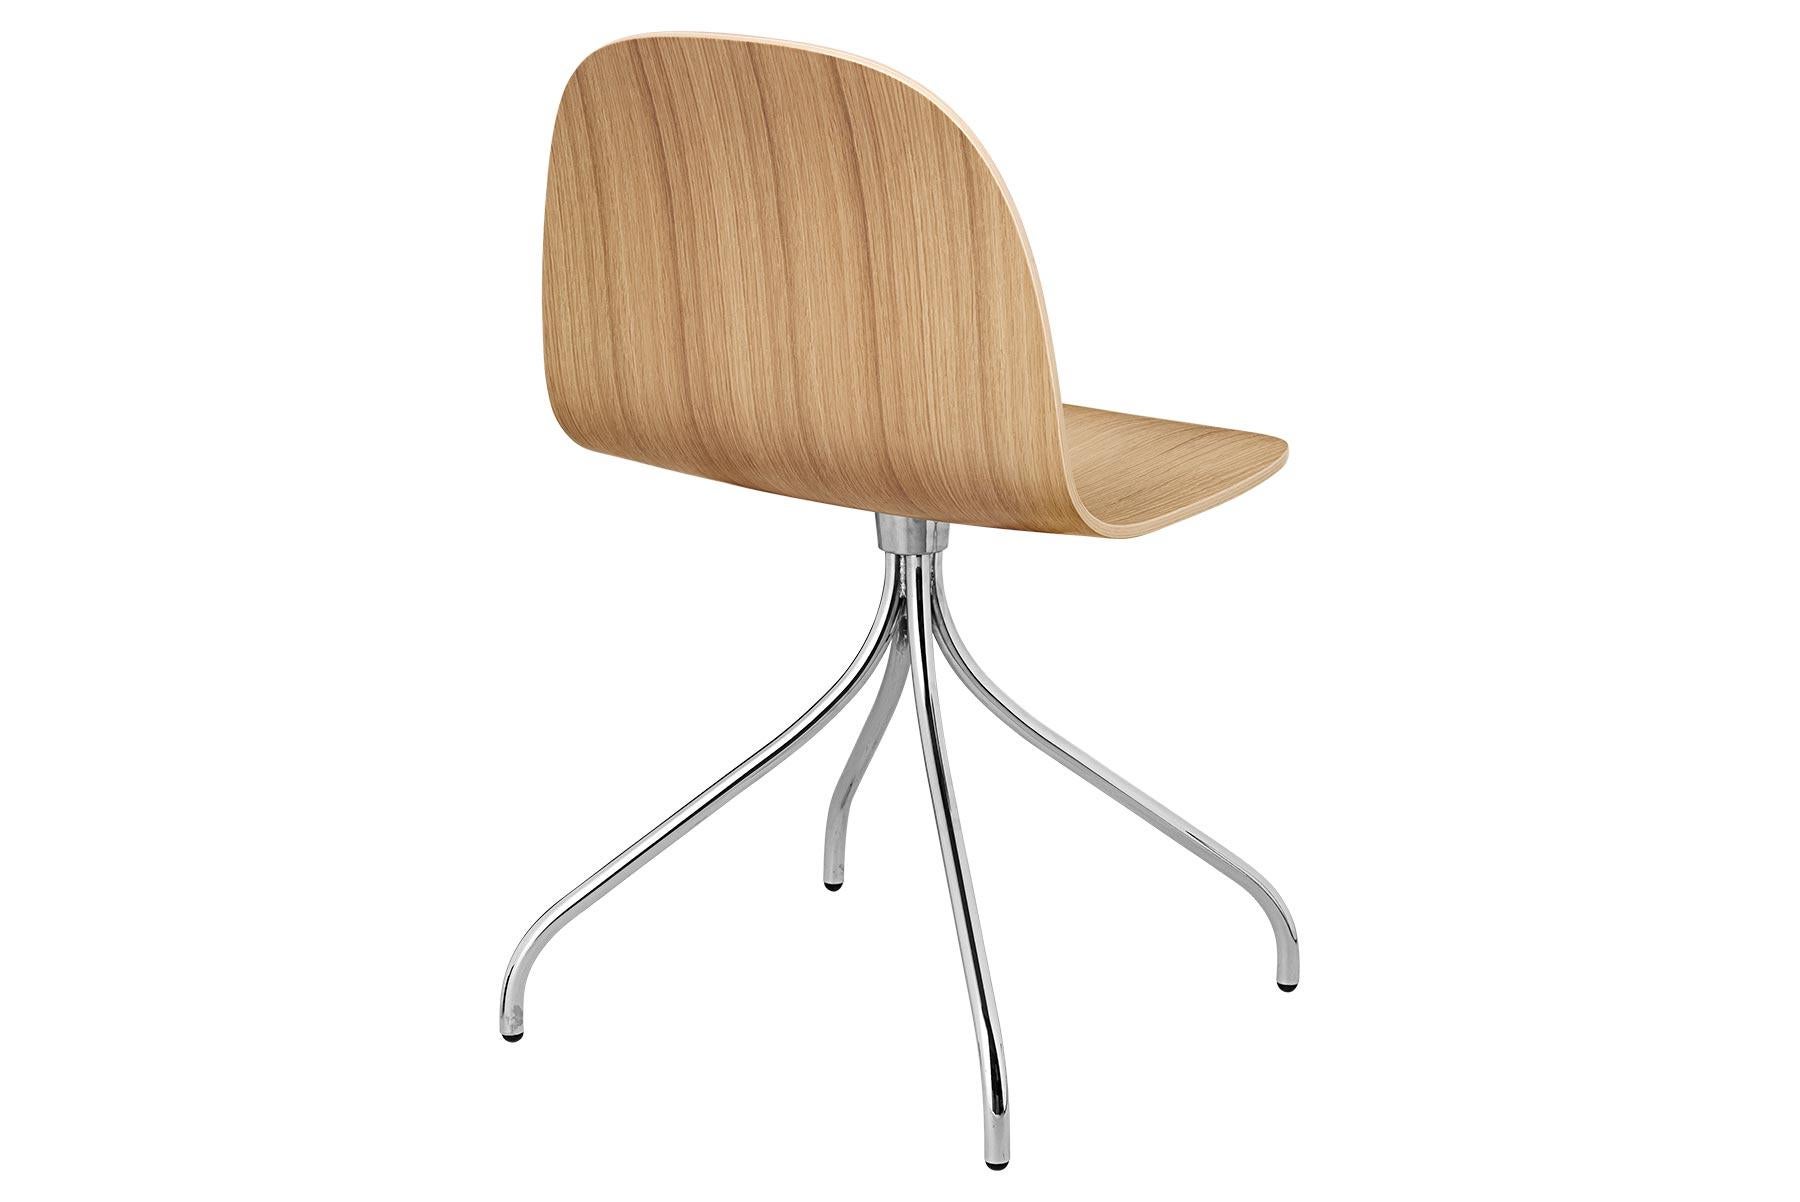 The Gubi 2D chair is a series of light dining chairs made from laminated veneer with a wide range of applications within private and public spaces. Being an extension to the Classic Gubi 3D chair, it is characterized by its more sleek and